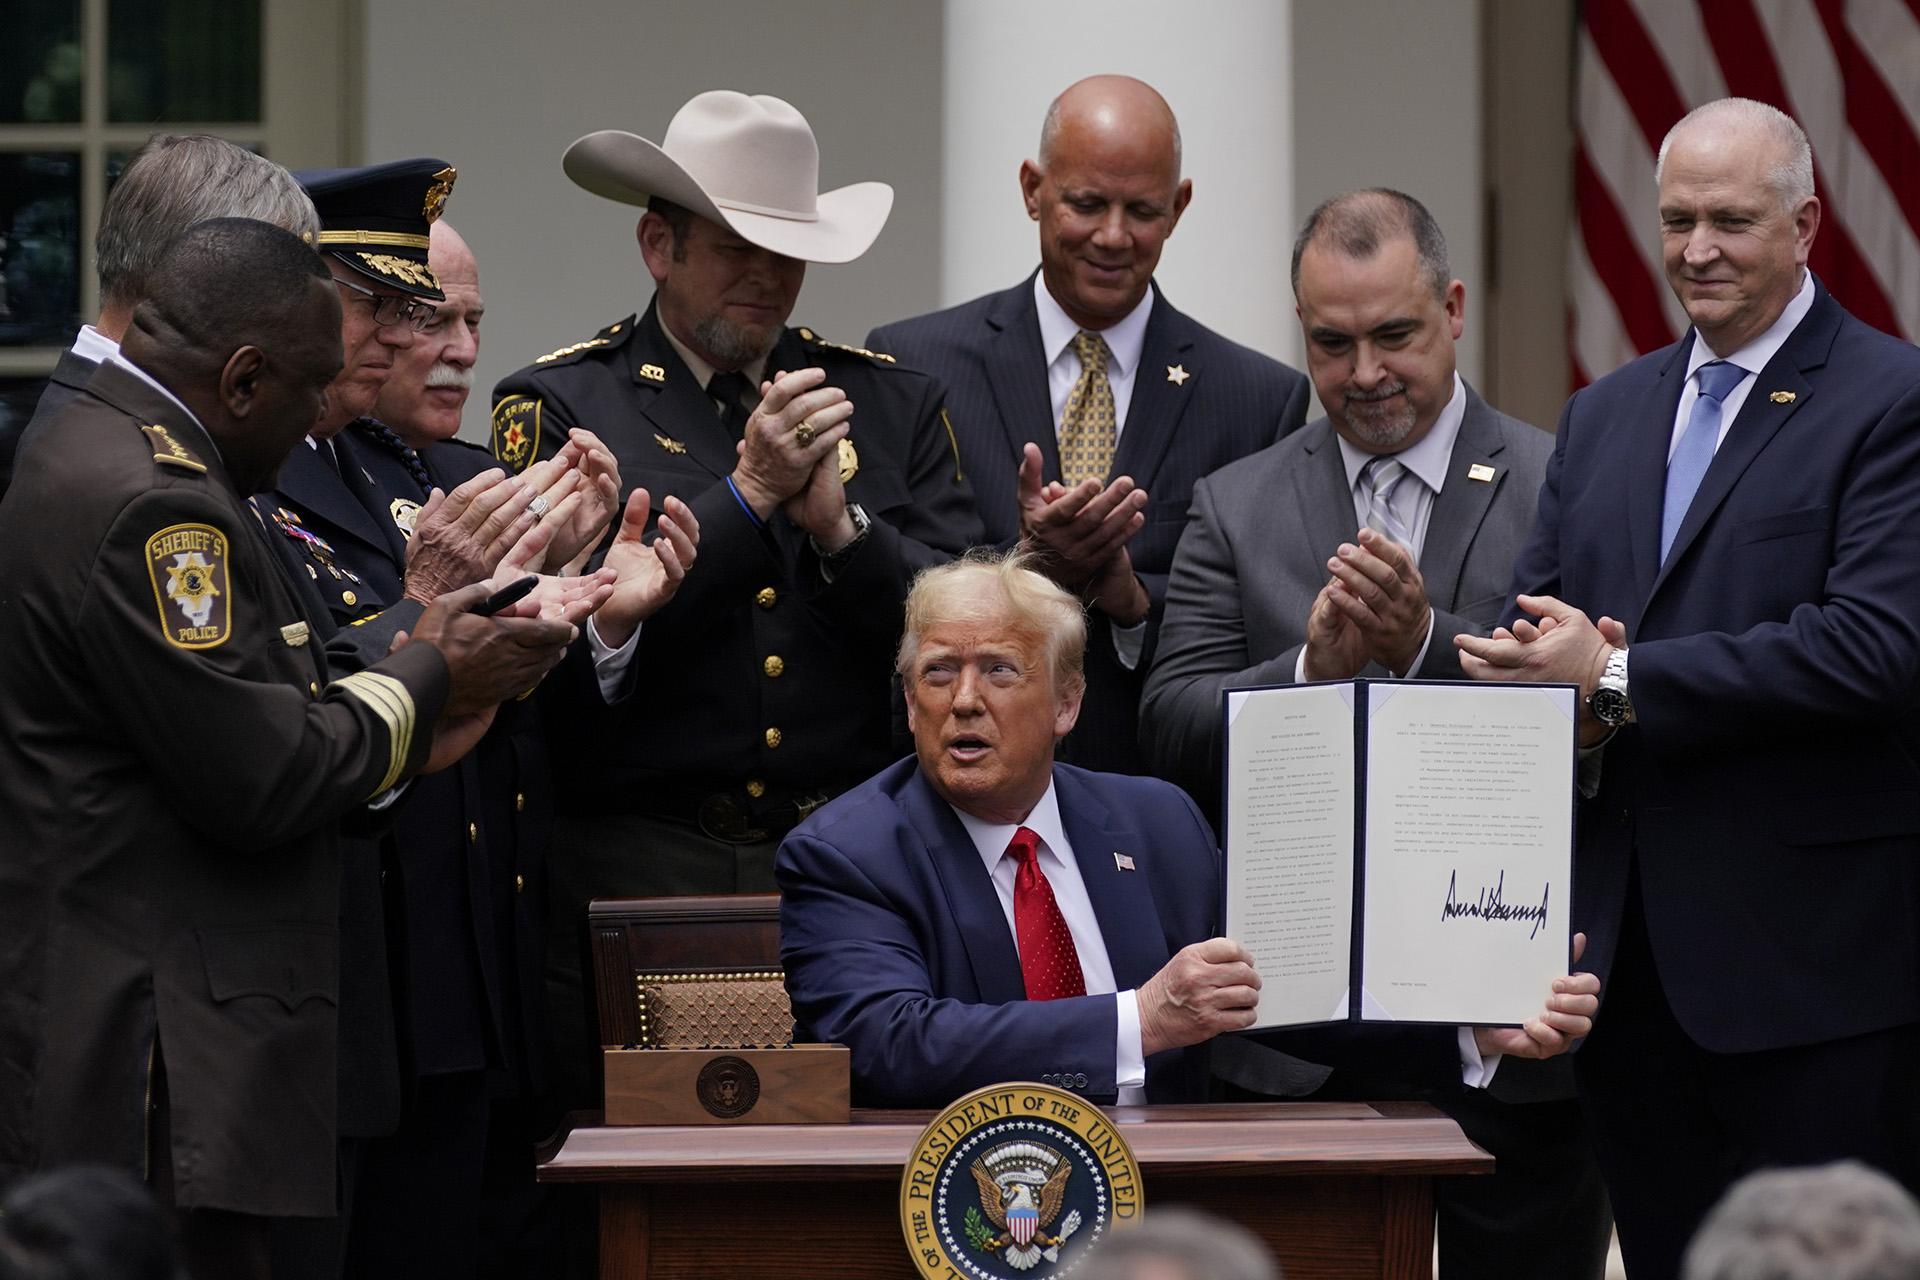 Law enforcement officials applaud after President Donald Trump signed an executive order on police reform, in the Rose Garden of the White House, Tuesday, June 16, 2020, in Washington. (AP Photo / Evan Vucci)